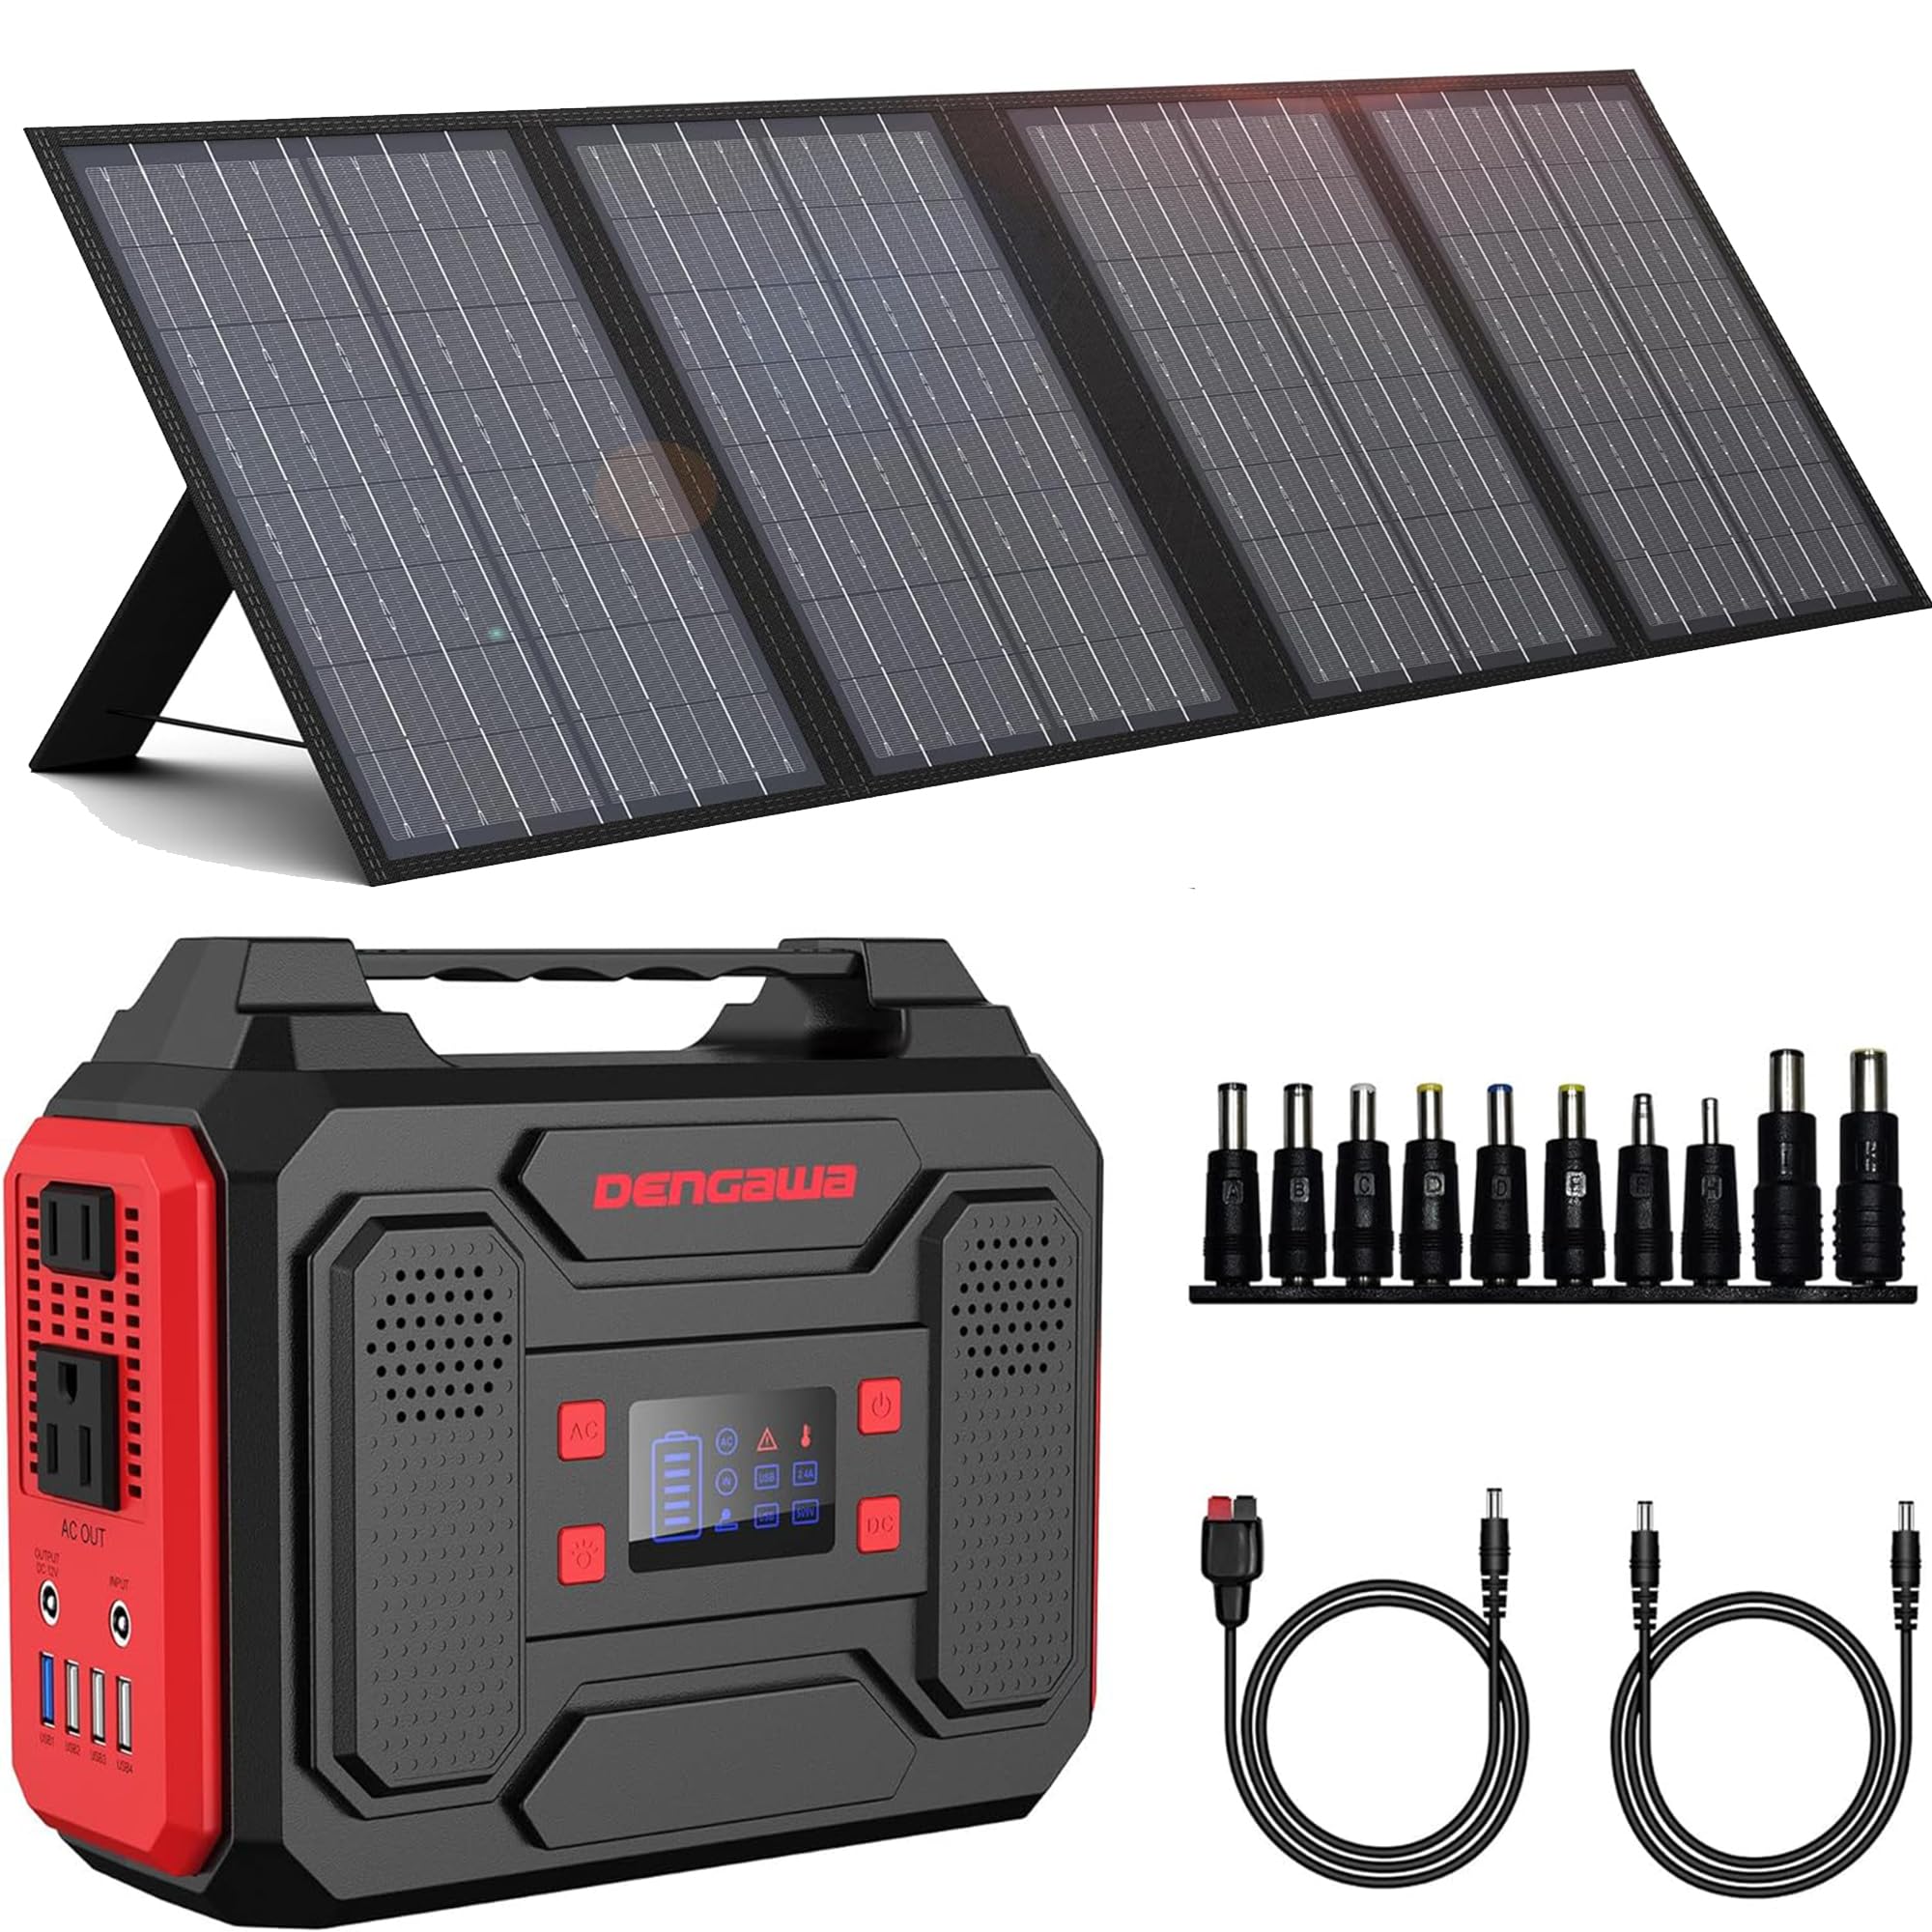 250Wh Portable Power Station with 60W Solar Panel, Solar Generator Outdoor Backup Battery Supply with AC Outlet for Tent Camping, Home Emergency, Traveling, RV Trip